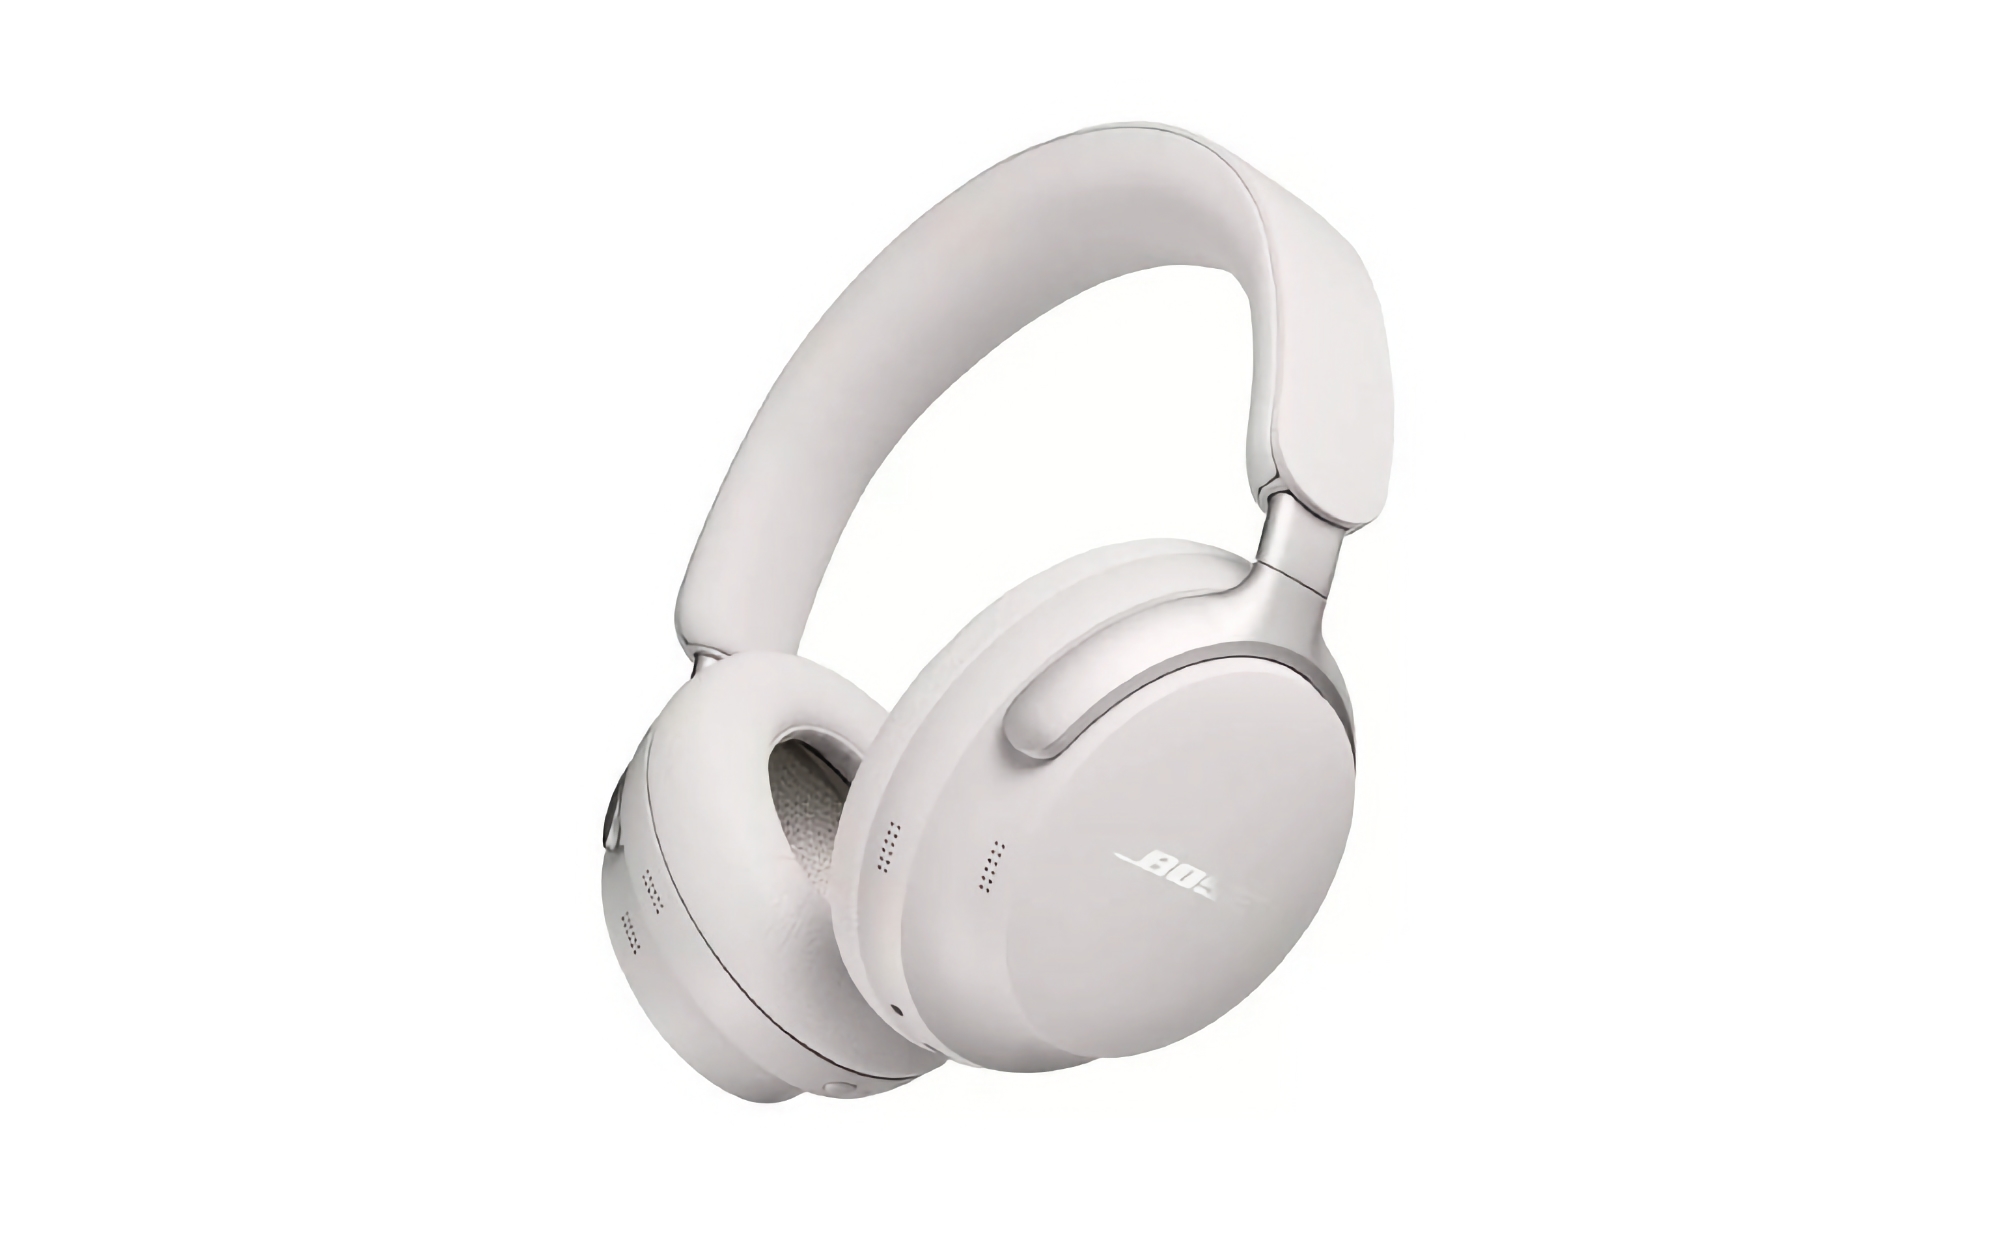 Bose has introduced the flagship QuietComfort Ultra headphones with Immersive Audio, IPX4 protection and ANC for $429